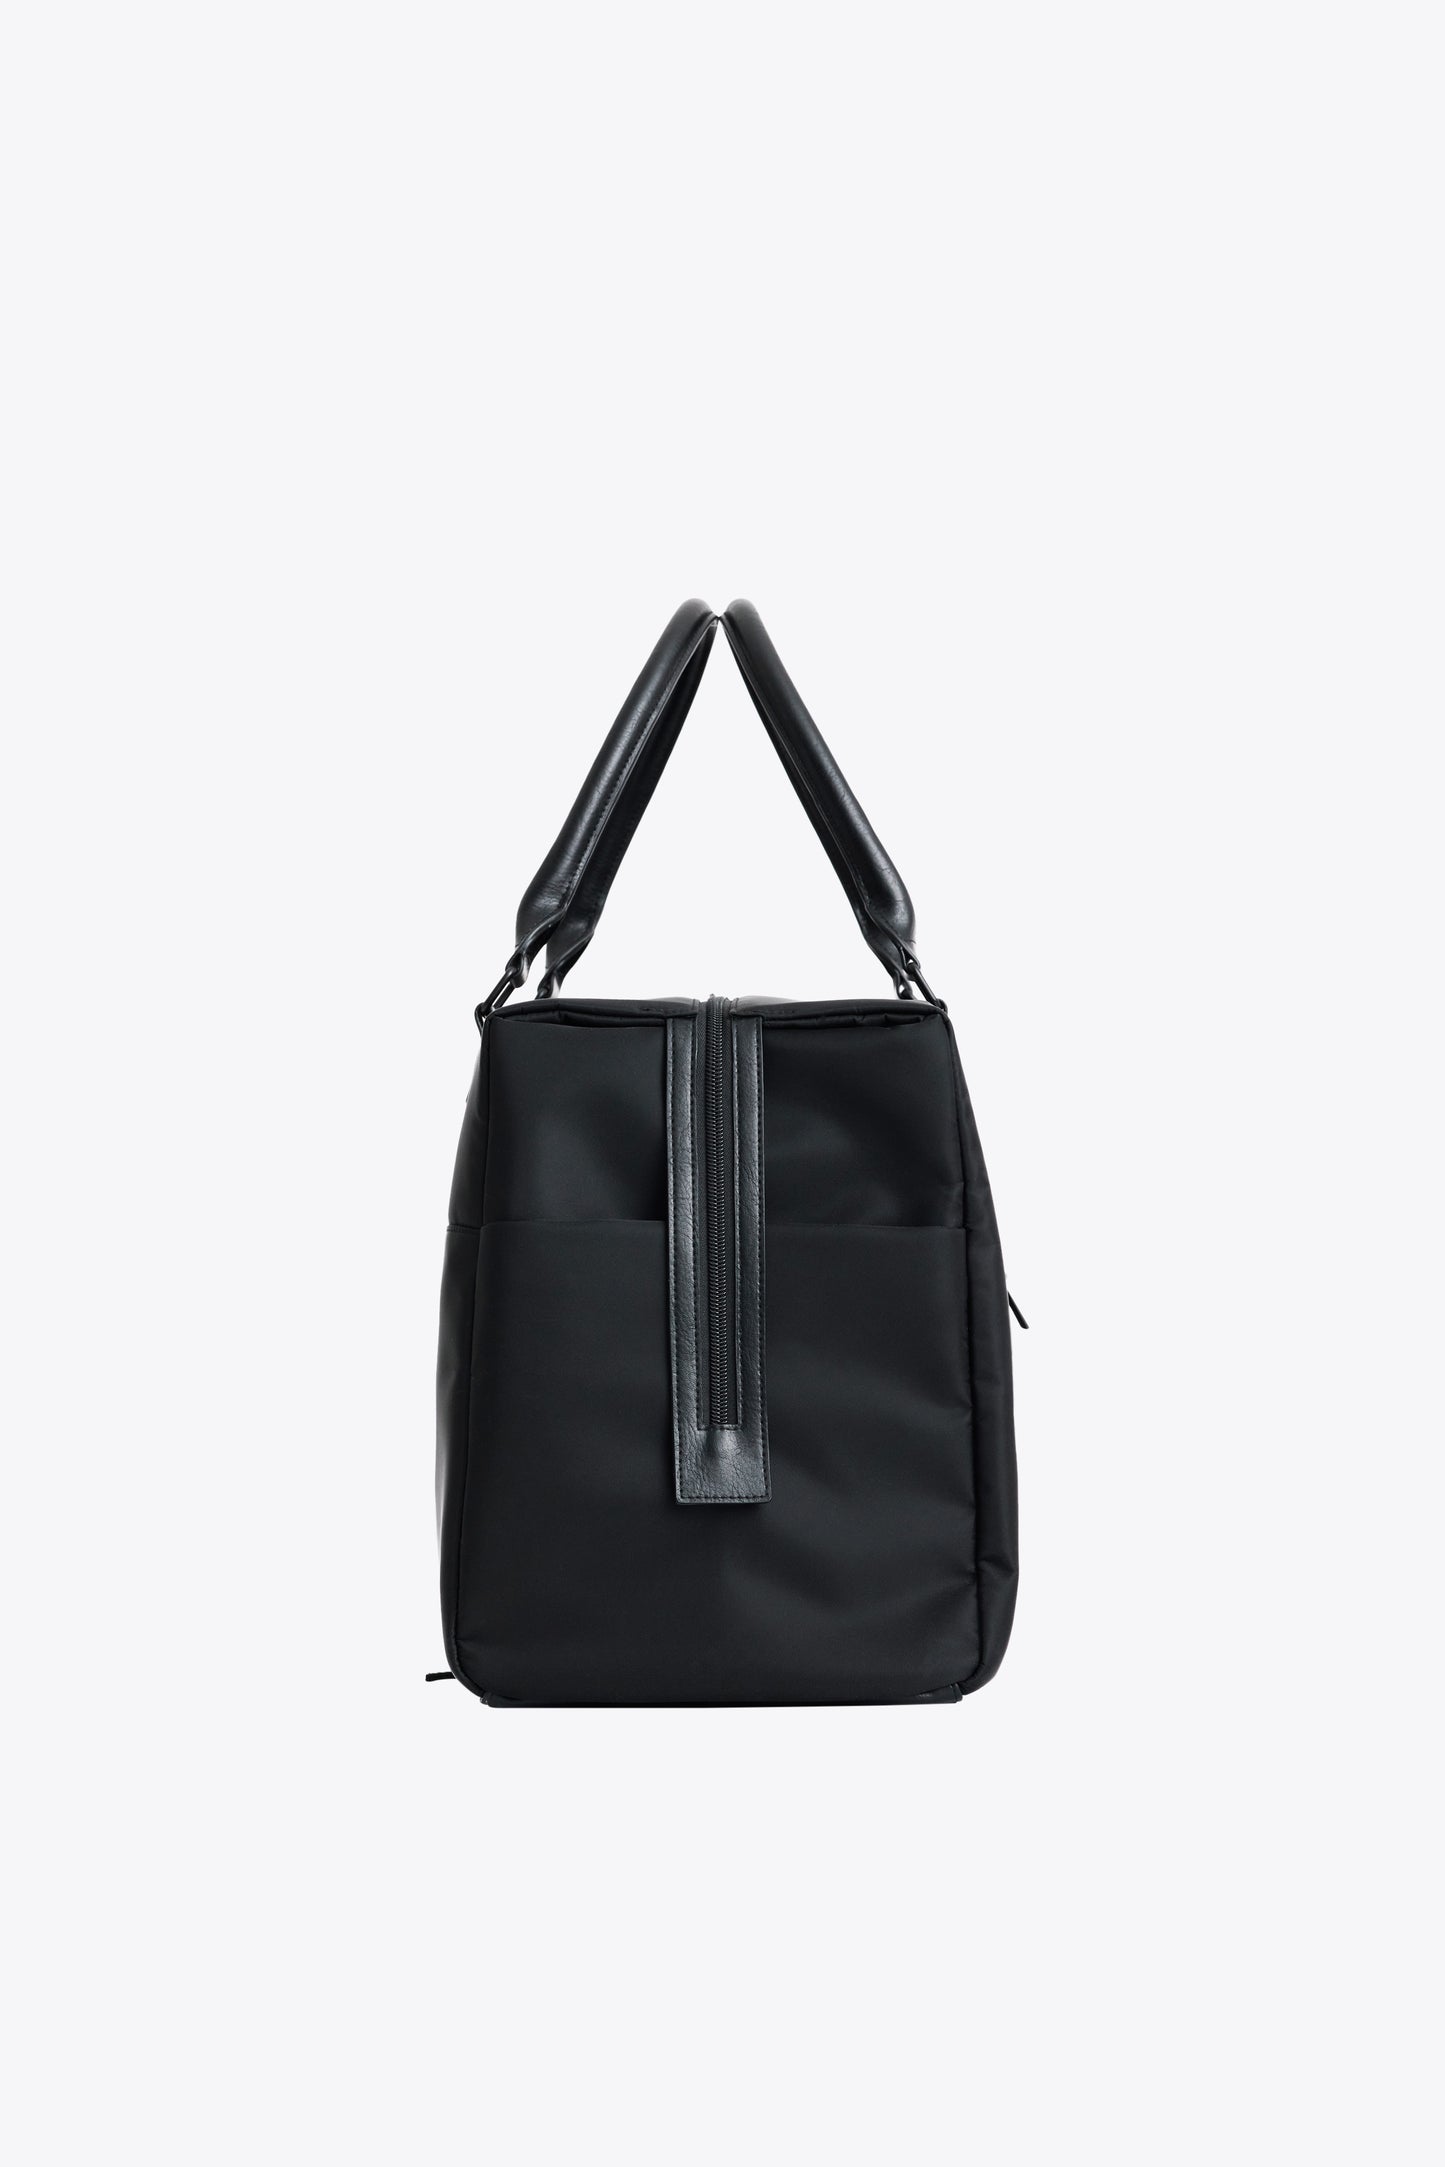 The Commuter Duffle in Black